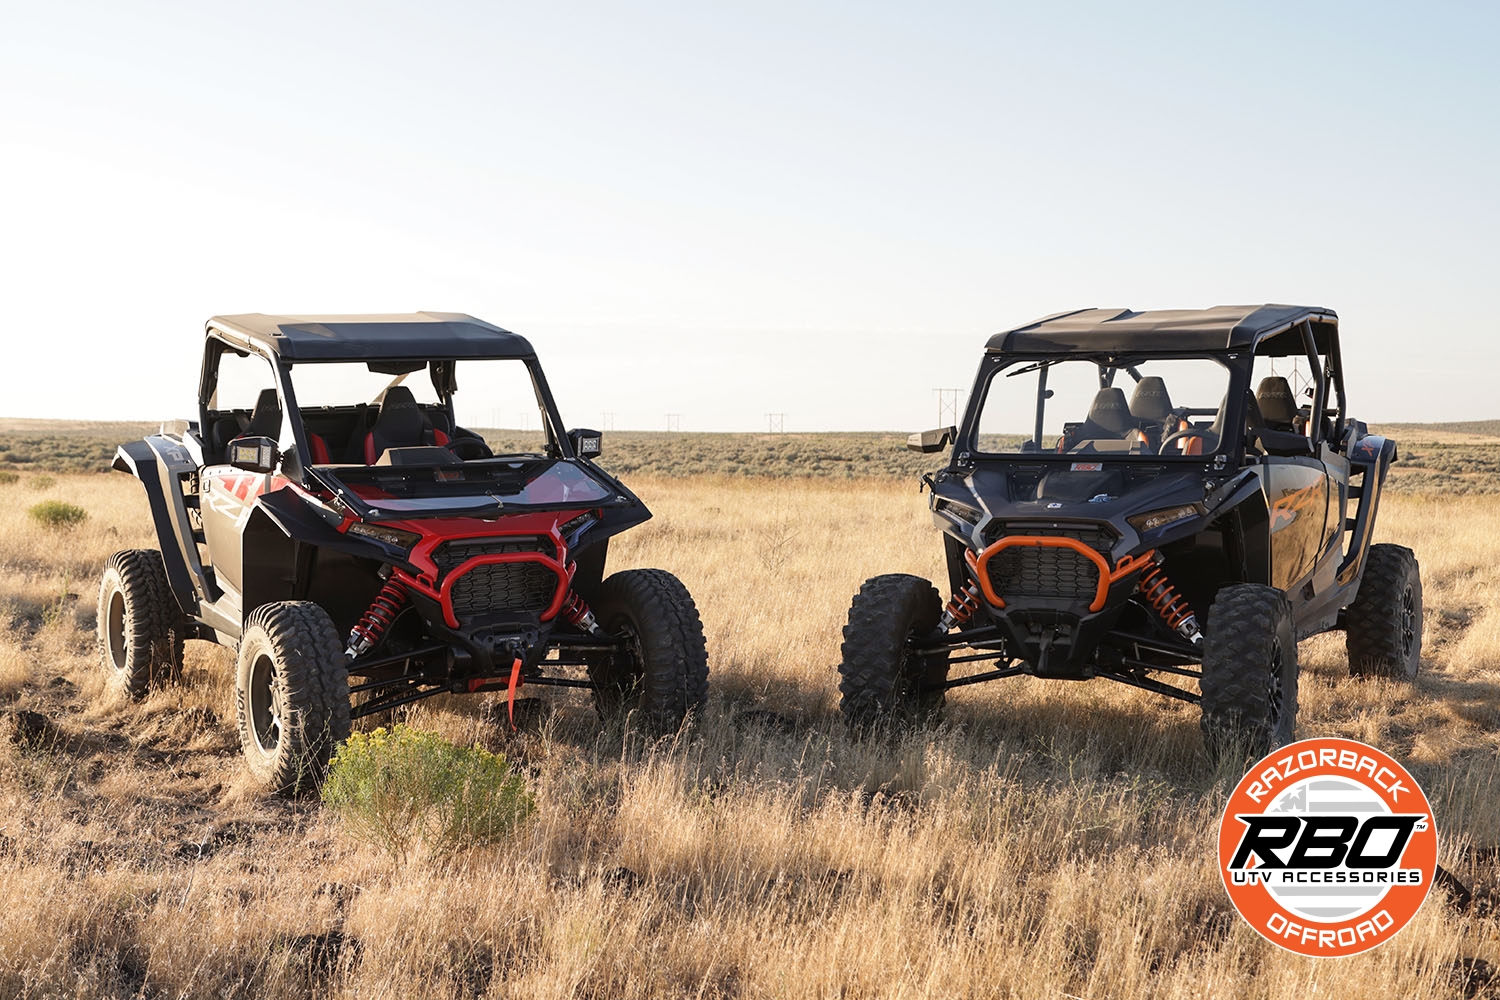 Polaris RZR XP Folding Windshield for 2 and 4 seat